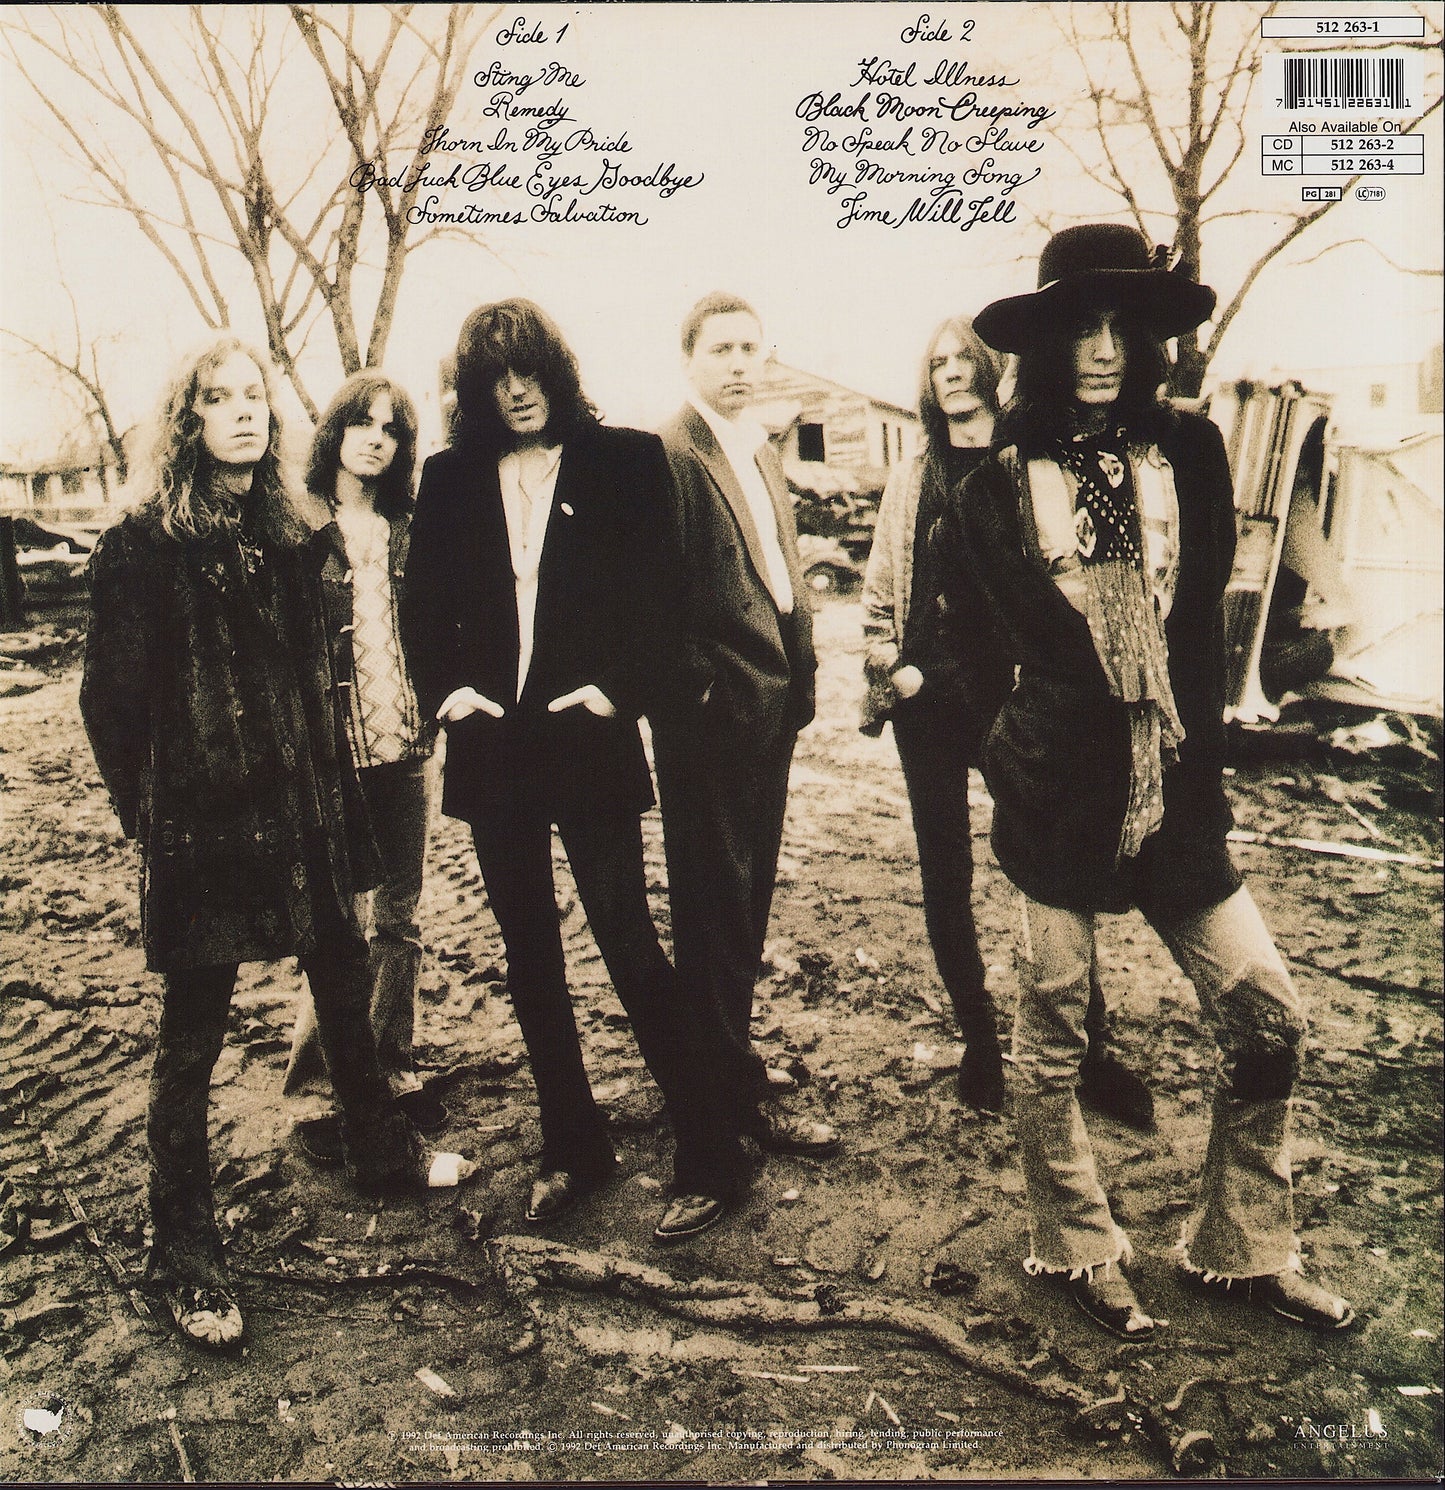 The Black Crowes ‎- The Southern Harmony And Musical Companion Vinyl LP